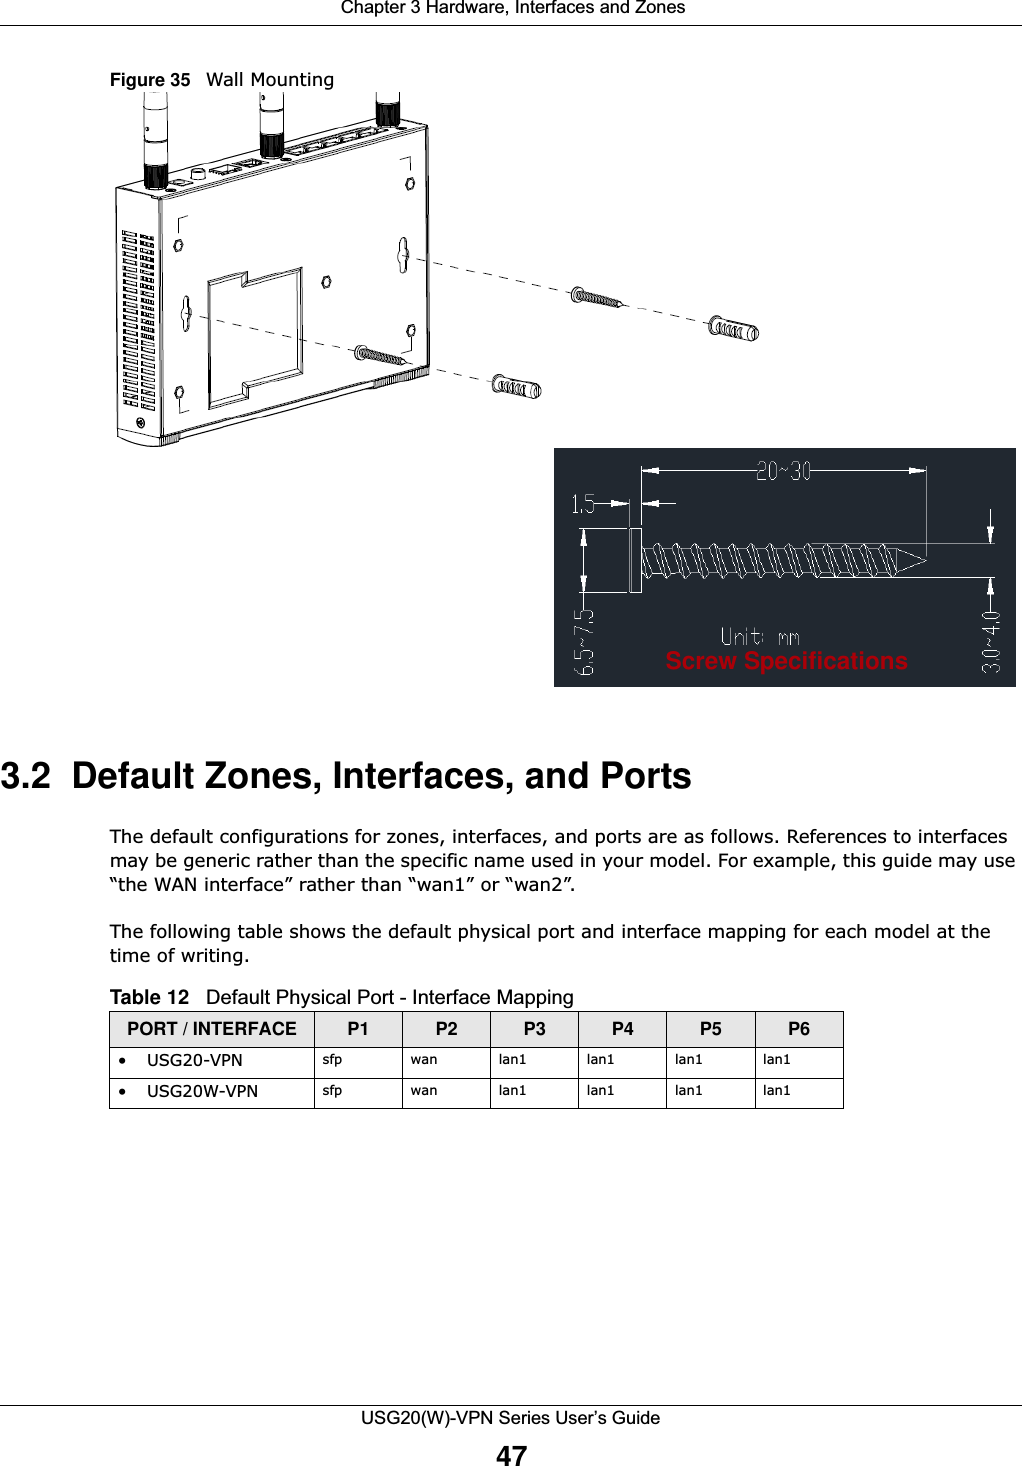  Chapter 3 Hardware, Interfaces and ZonesUSG20(W)-VPN Series User’s Guide47Figure 35   Wall Mounting3.2  Default Zones, Interfaces, and PortsThe default configurations for zones, interfaces, and ports are as follows. References to interfaces may be generic rather than the specific name used in your model. For example, this guide may use “the WAN interface” rather than “wan1” or “wan2”.The following table shows the default physical port and interface mapping for each model at the time of writing.Screw SpecificationsTable 12   Default Physical Port - Interface Mapping PORT / INTERFACE P1 P2 P3 P4 P5 P6• USG20-VPN sfp wan lan1 lan1 lan1 lan1• USG20W-VPN sfp wan lan1 lan1 lan1 lan1